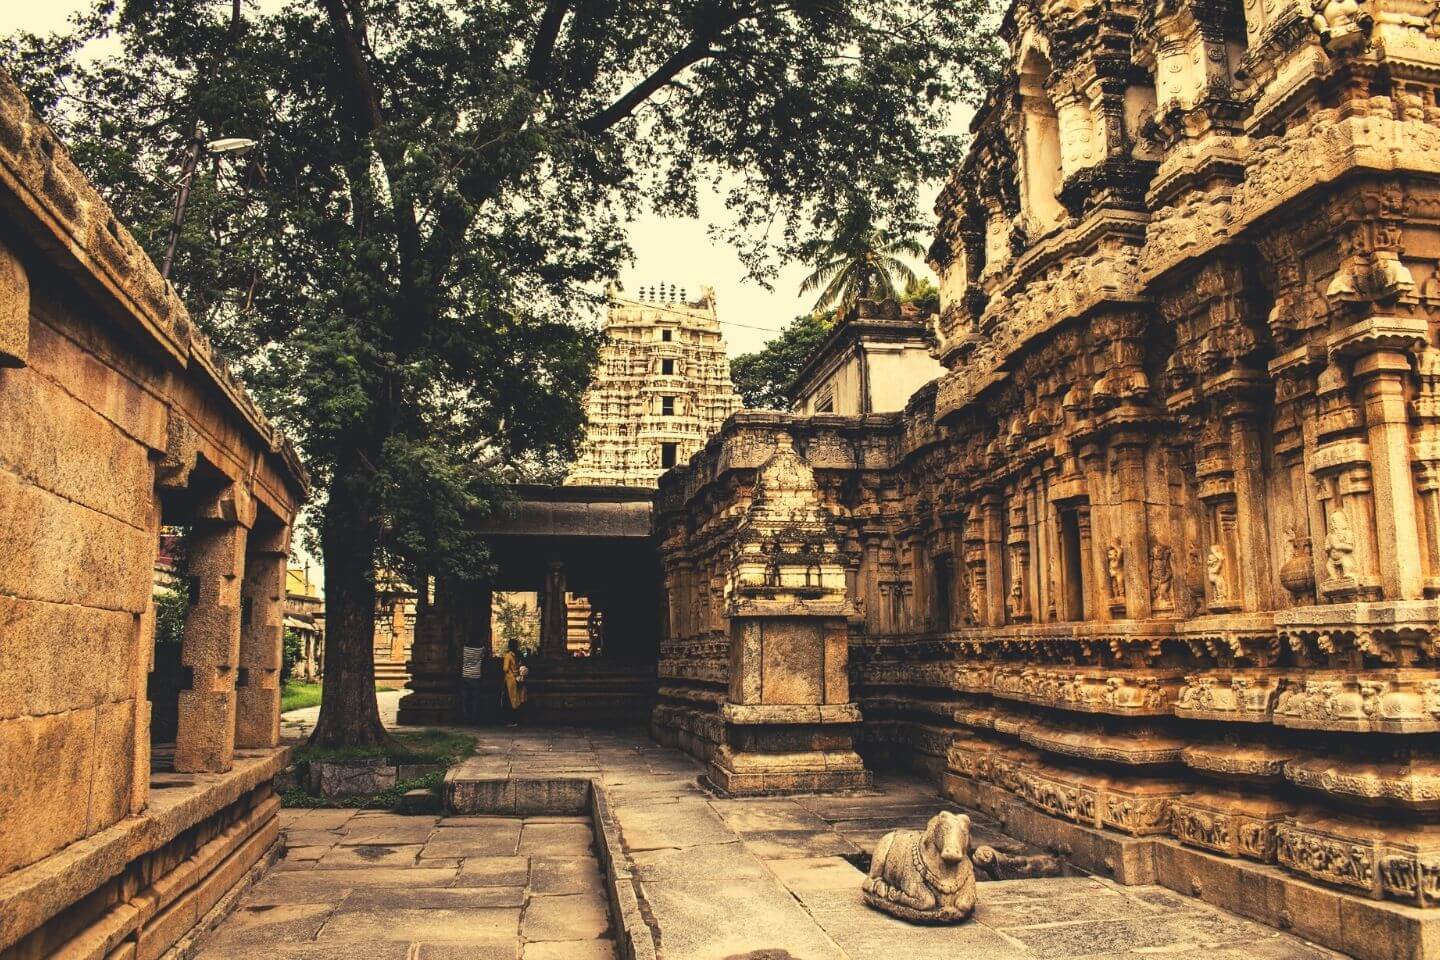 Someshwara Temple in Kolar is one the best temples to visit with family near Bengaluru within 100 km